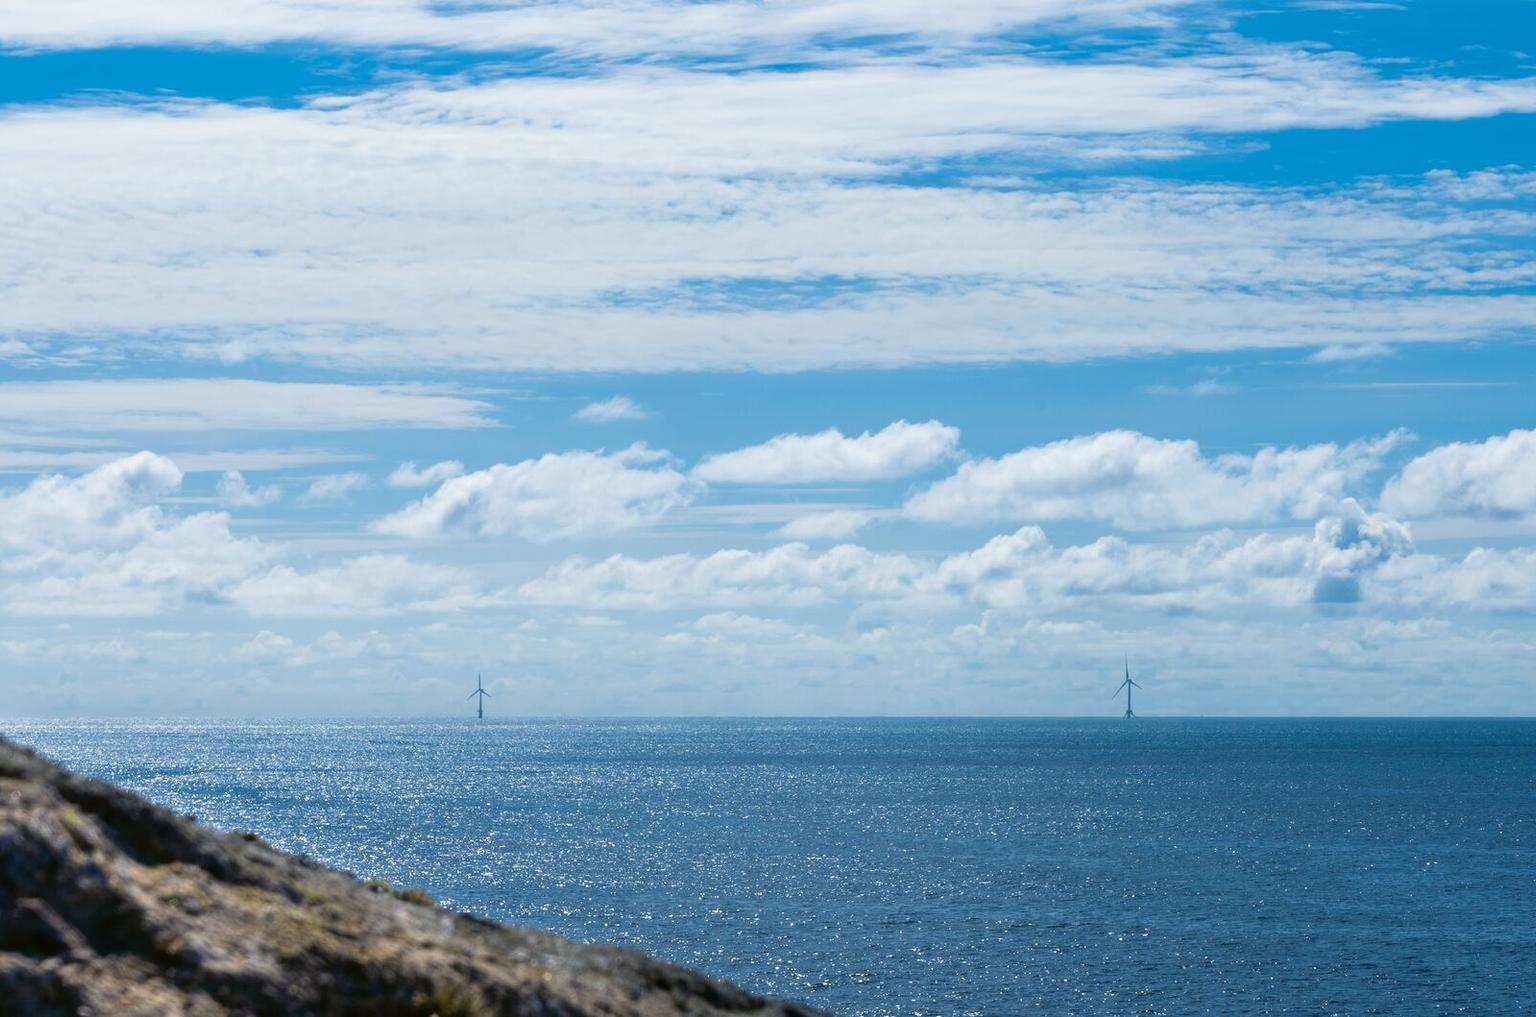 Landscape with floating offshore wind turbines